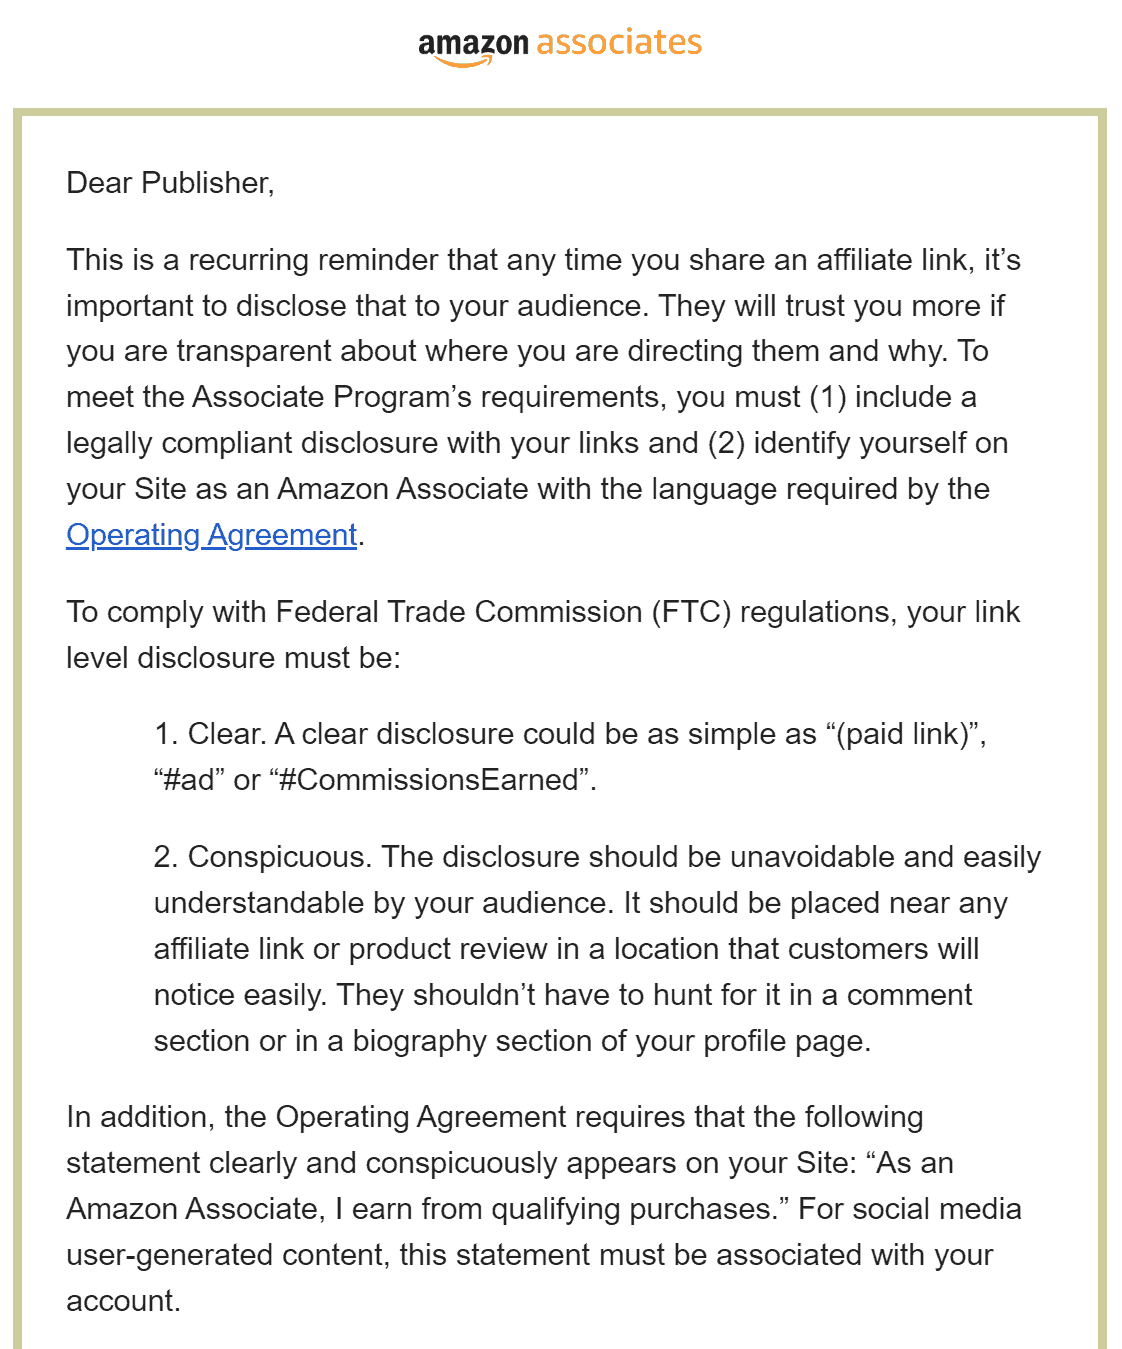 A screenshot of an email from the Amazon Associates program, reminding publishers about FTC regulations and that the Amazon operating agreement requires specific disclosure language.